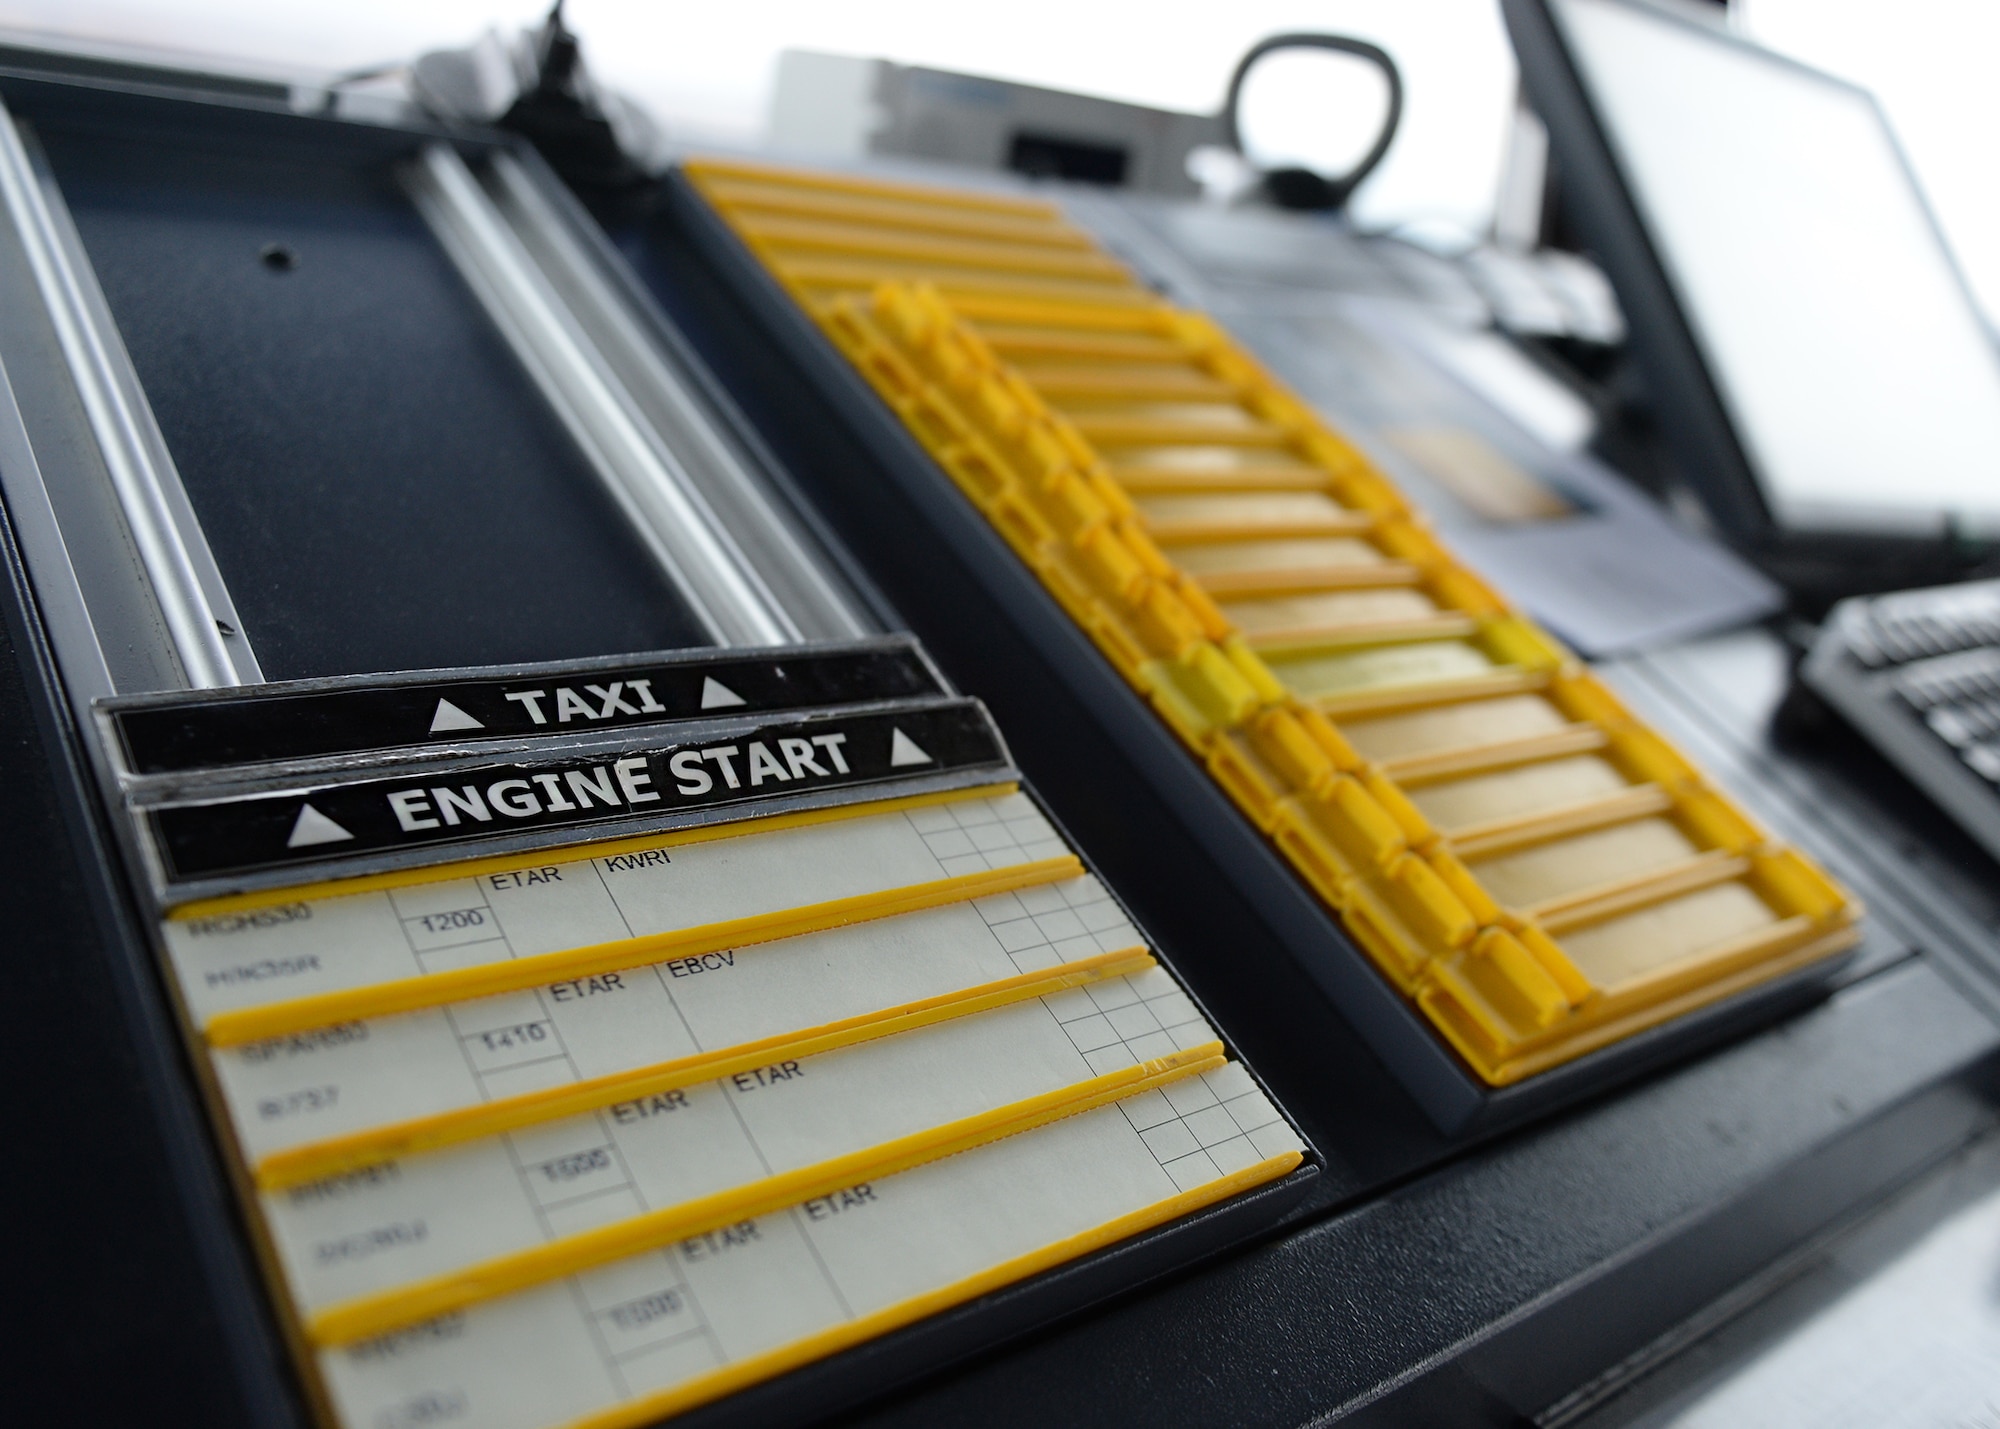 Flight progress strips are displayed on a workstation at Ramstein Air Base, Germany, Dec 13, 2016. Flight progress strips are used to track any pertinent information for flights coming in or going out of an airfield. (U.S. Air Force photo by Senior Airman Jimmie D. Pike)